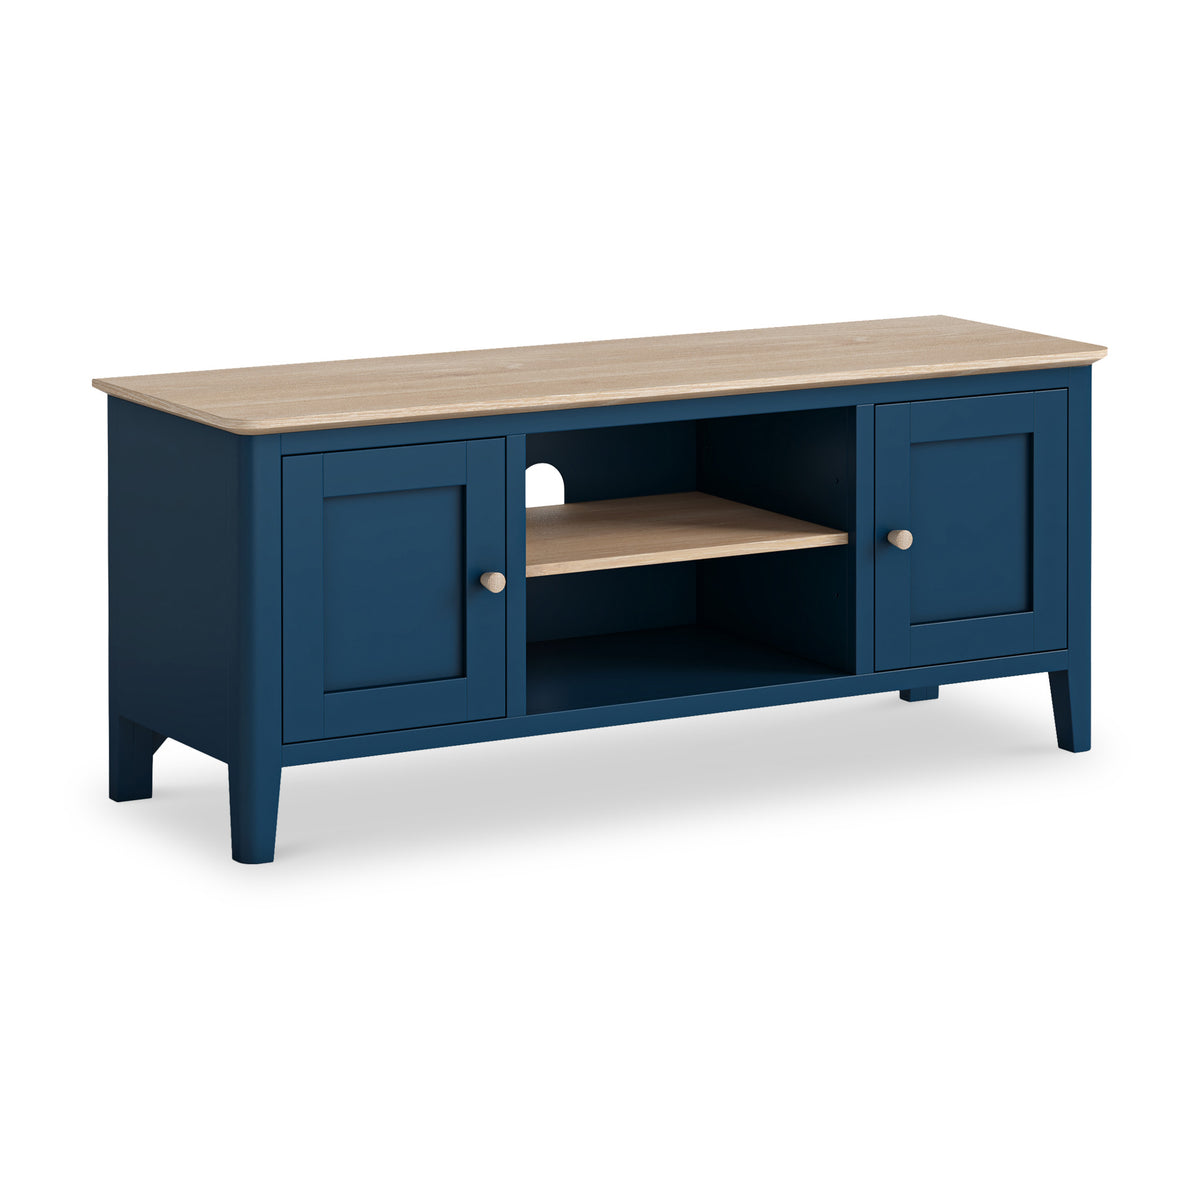 Penrose Navy 150cm TV Unit with wooden handles